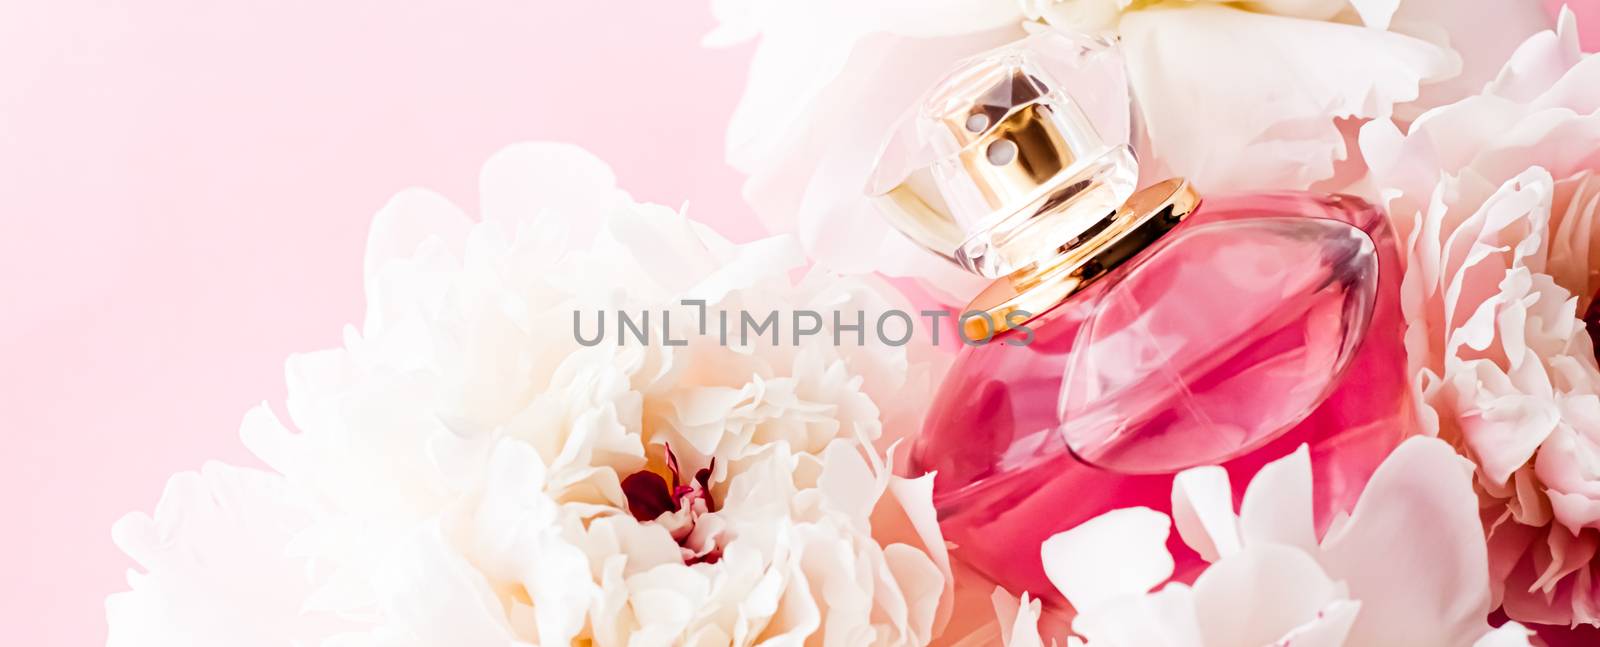 Luxurious fragrance bottle as chic perfume product on background of peony flowers, parfum ad and beauty branding design